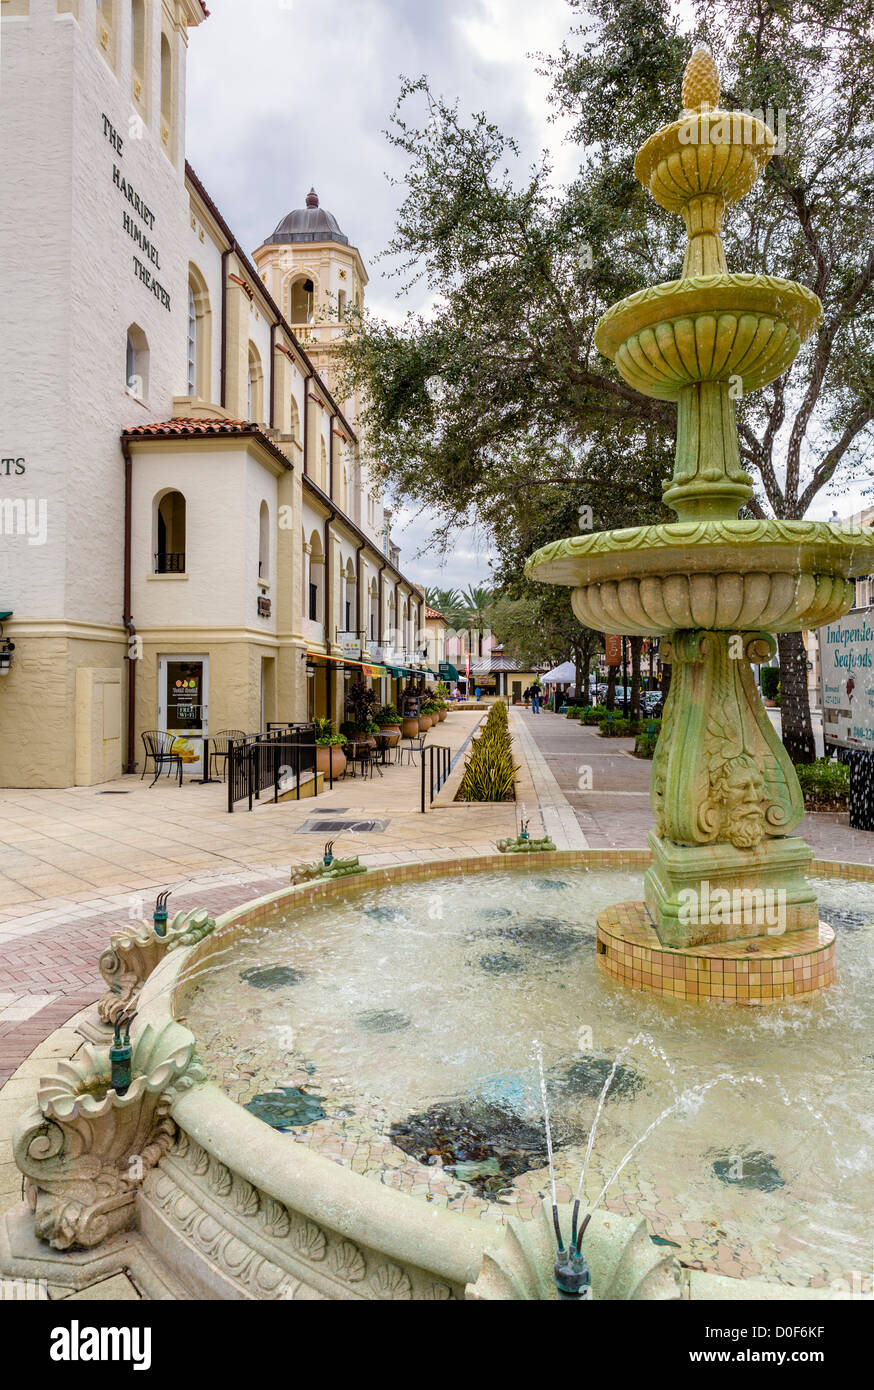 Cityplace development by the Harriet Himmel Theater, South Rosemary Avenue, West Palm Beach, Treasure Coast, Florida, USA Stock Photo